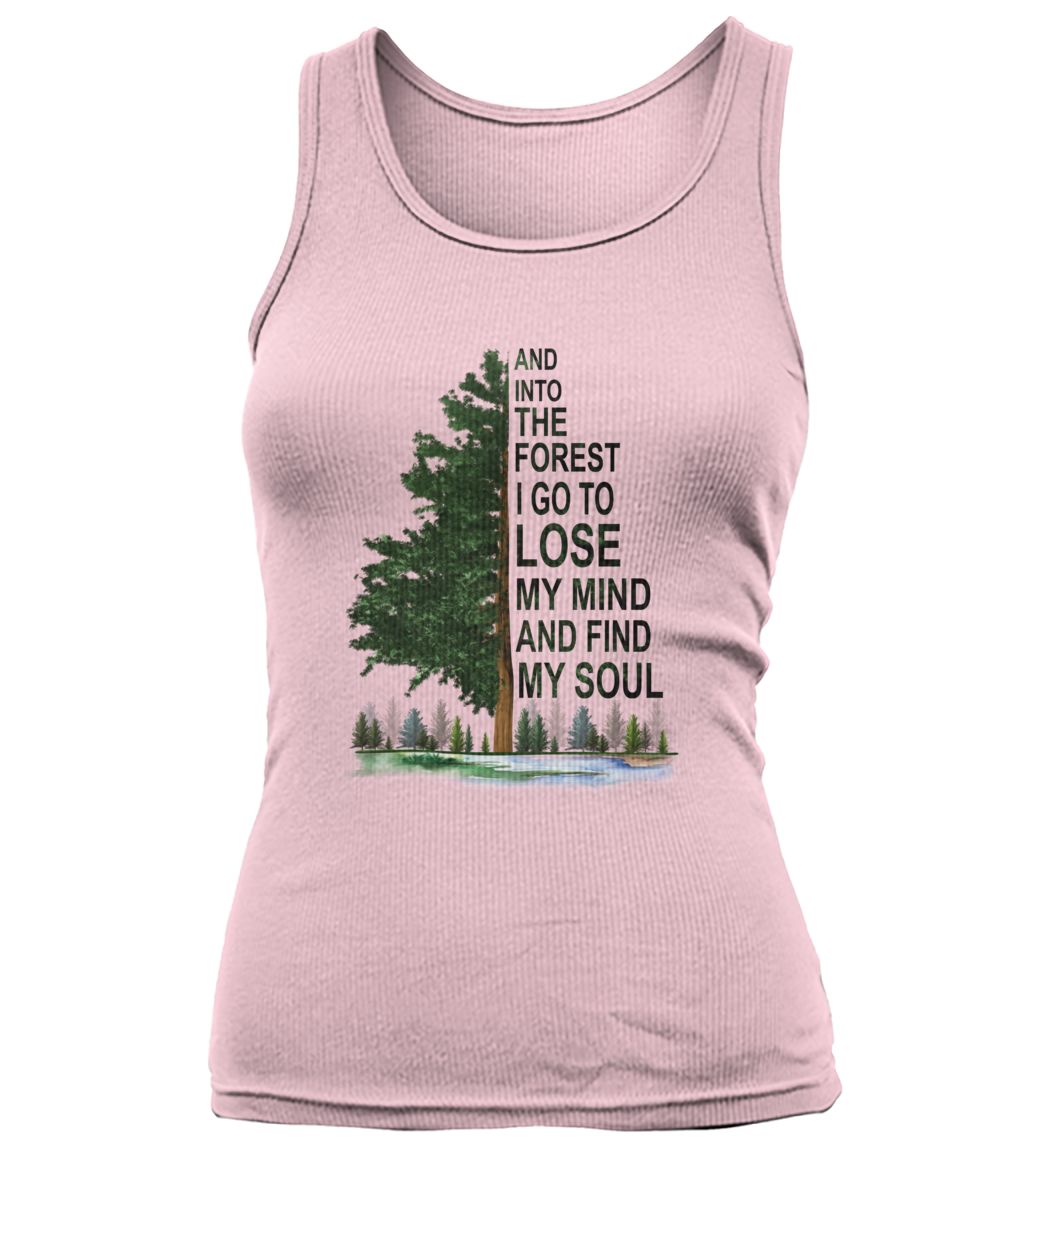 And into the forest I go to lose my mind and find my soul women's tank top